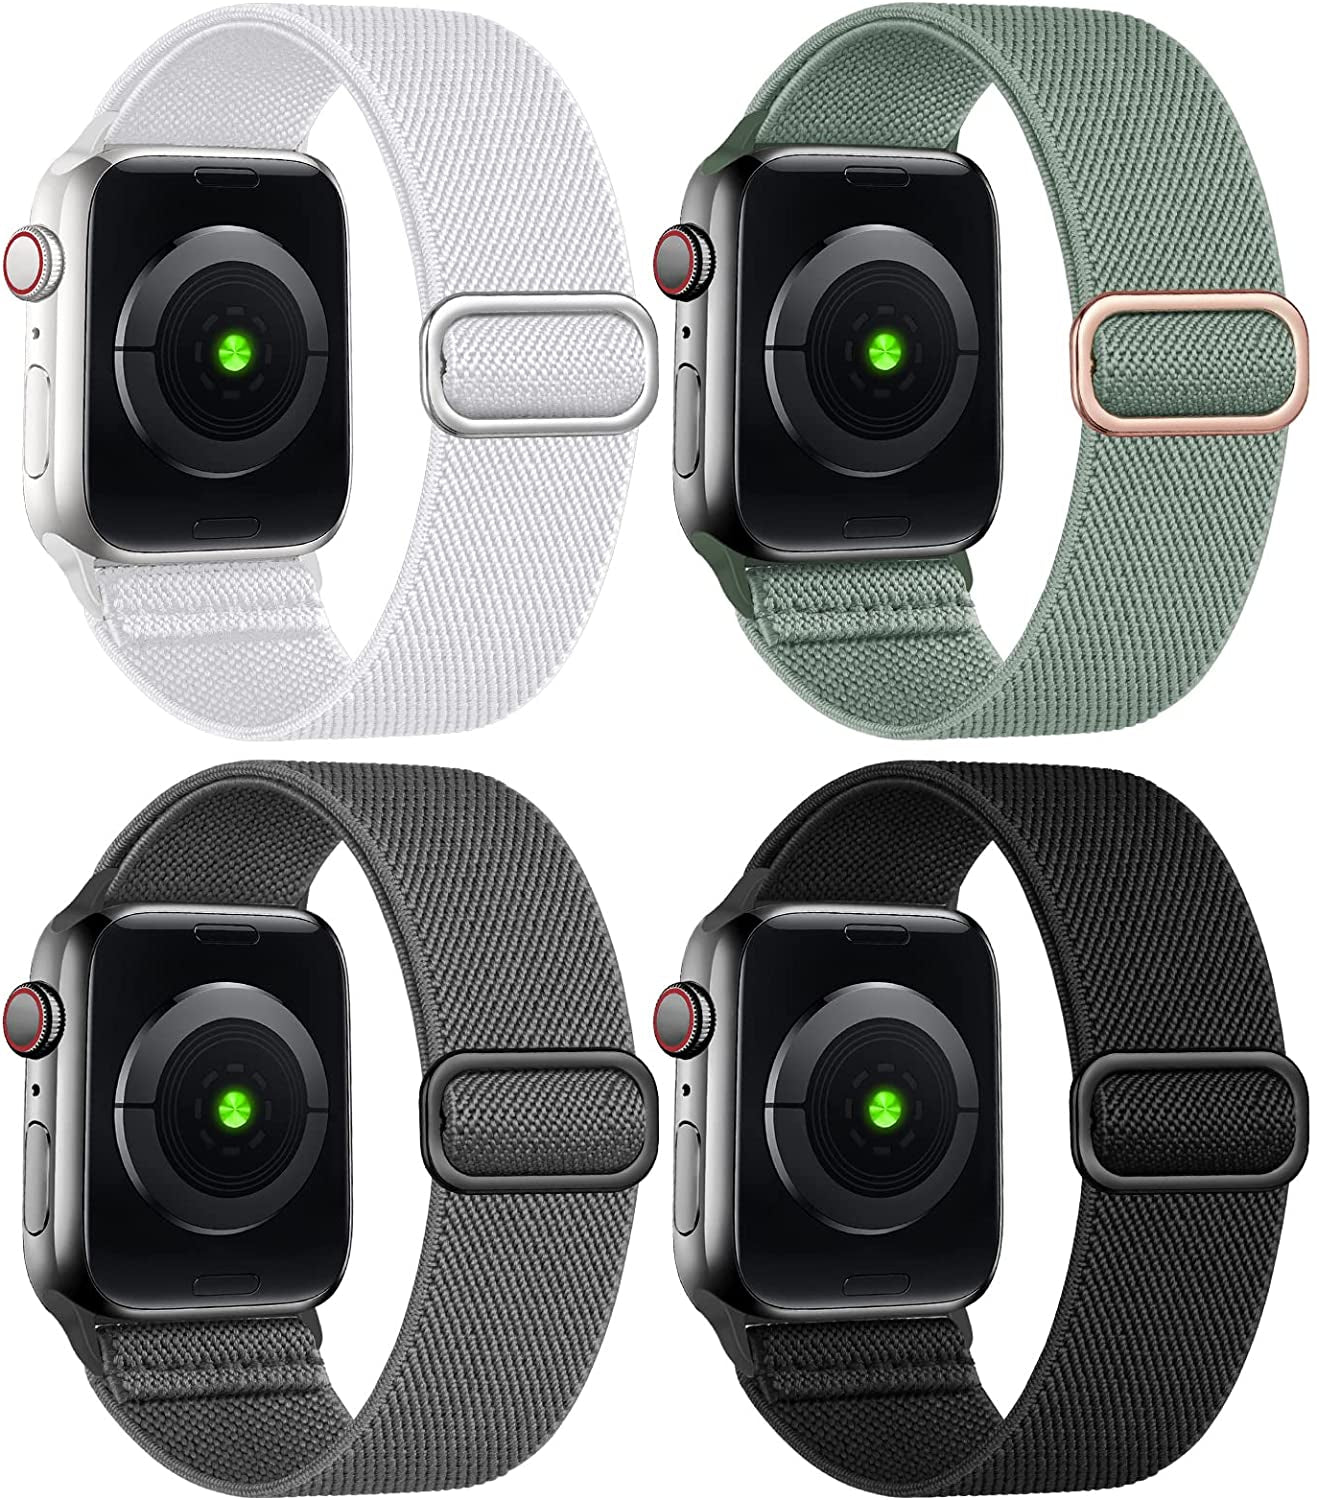 4 Pack Stretchy Bands Compatible for Apple Watch 